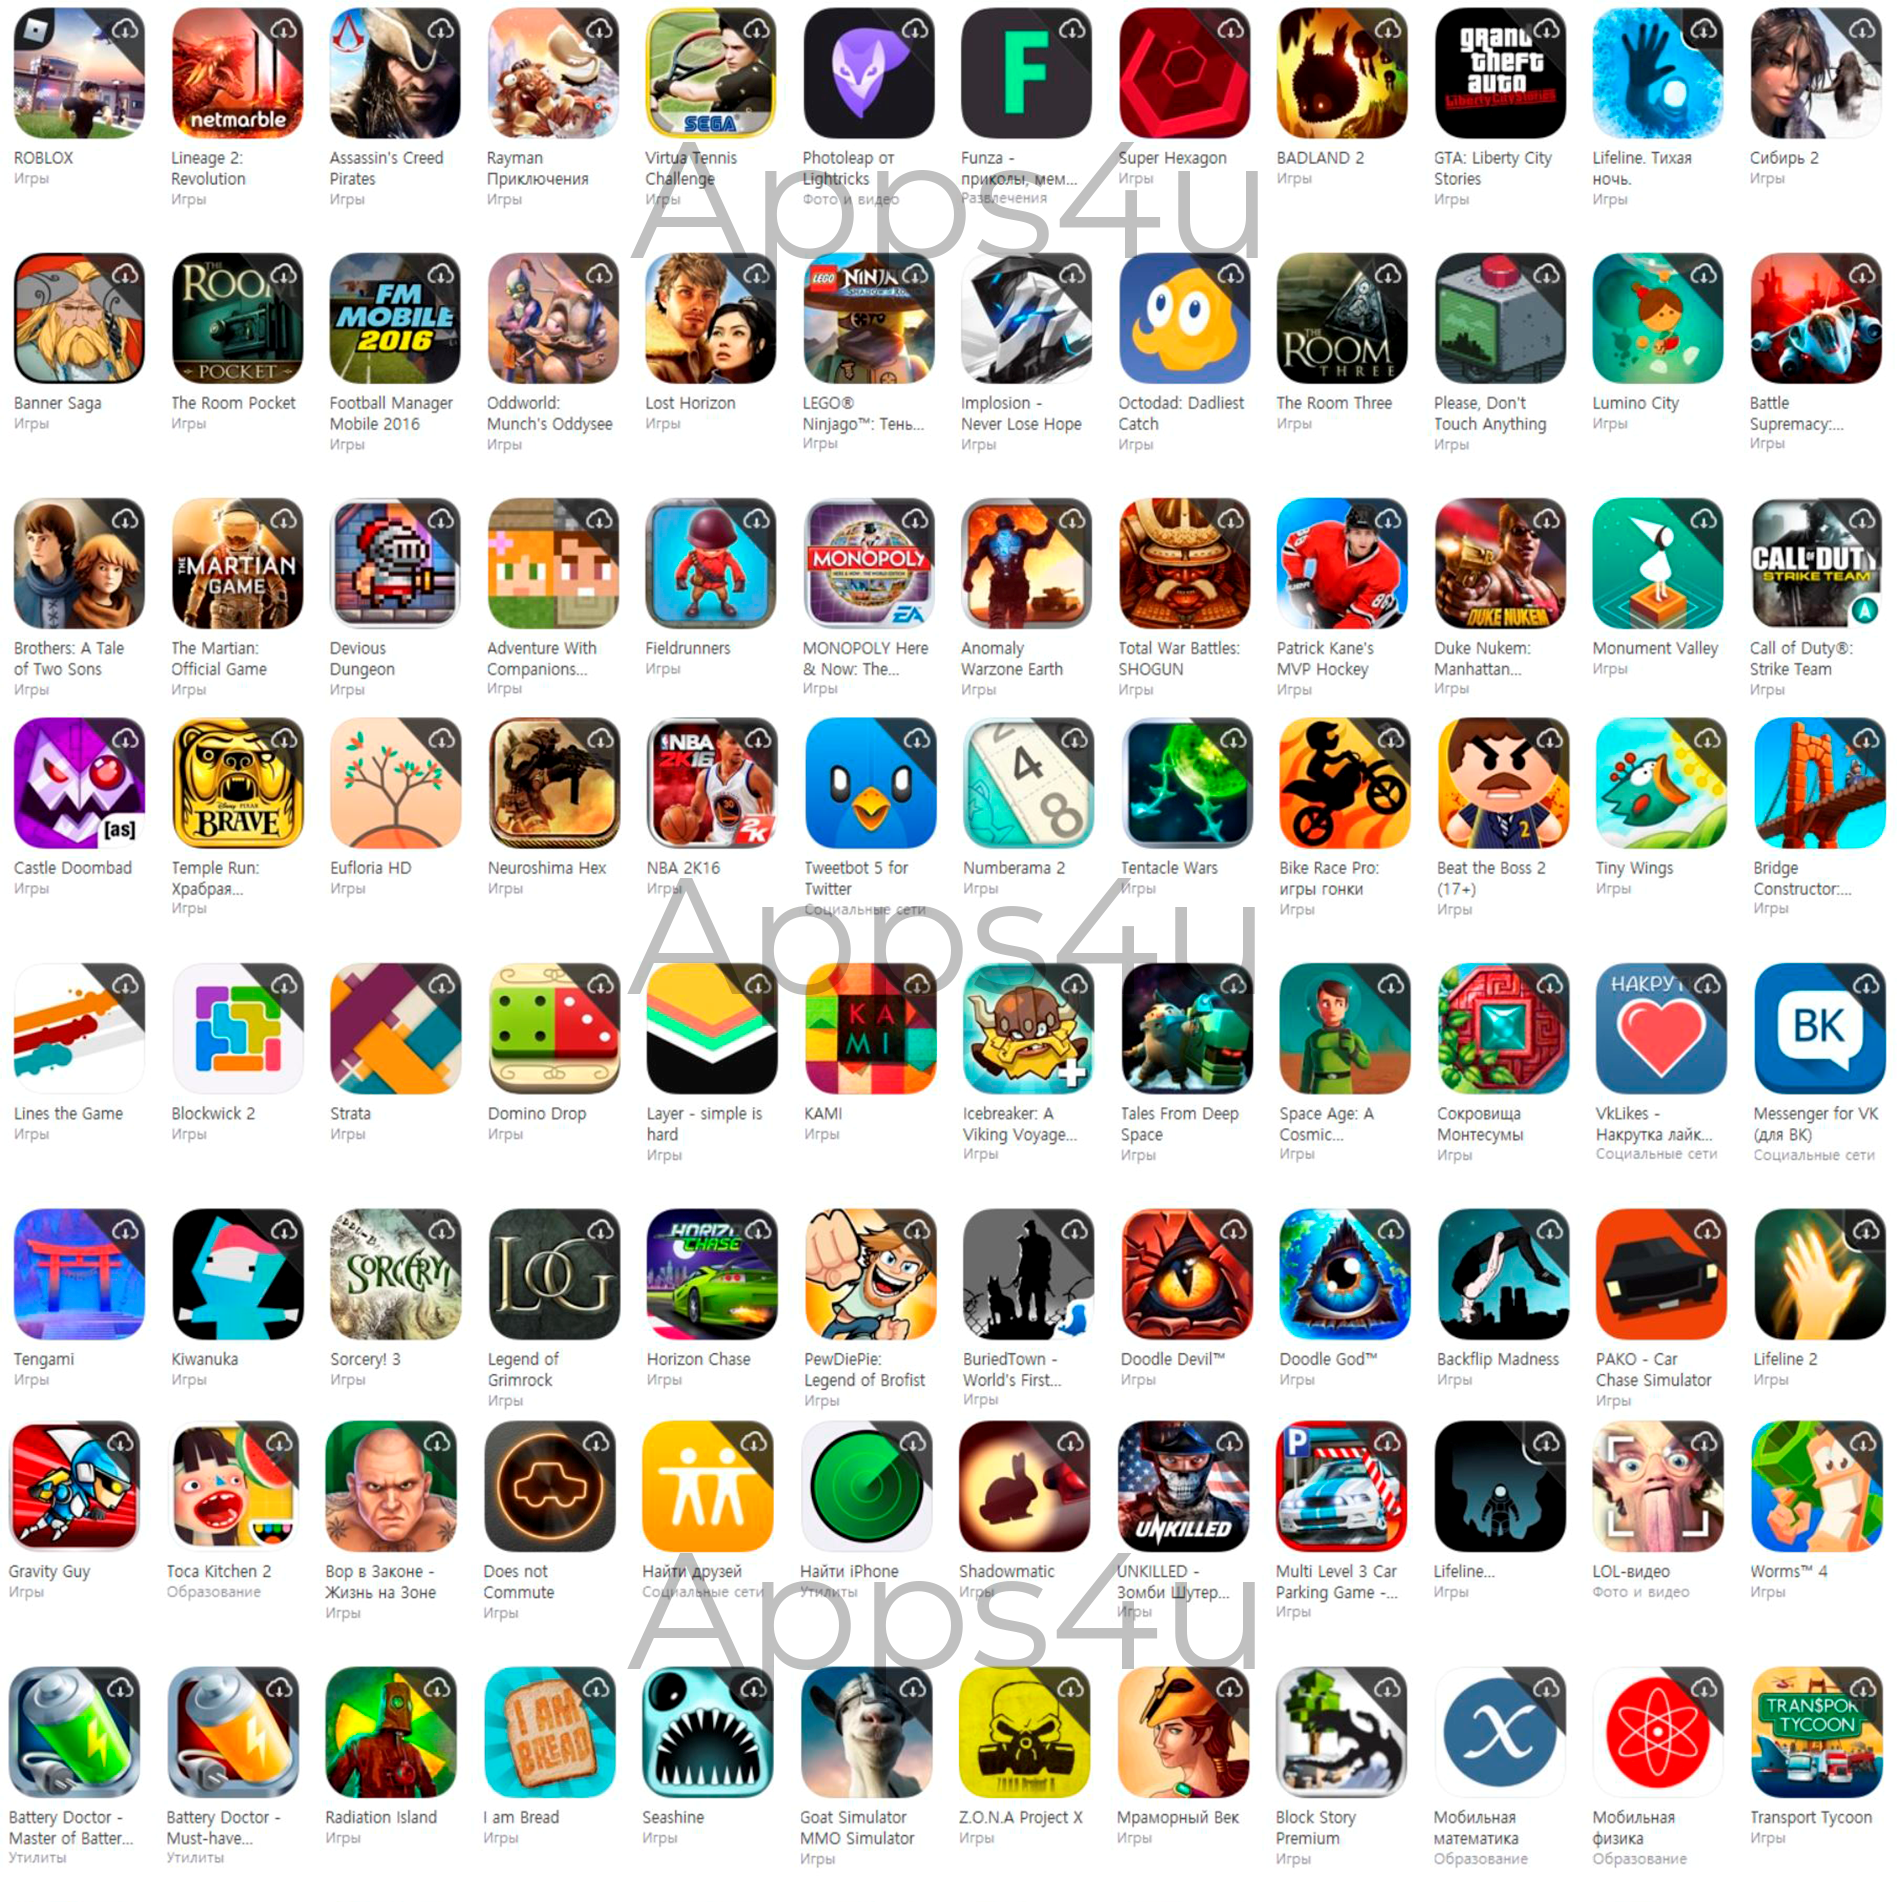 Shared account iOS, iPhone, iPad | 3000 games and apps